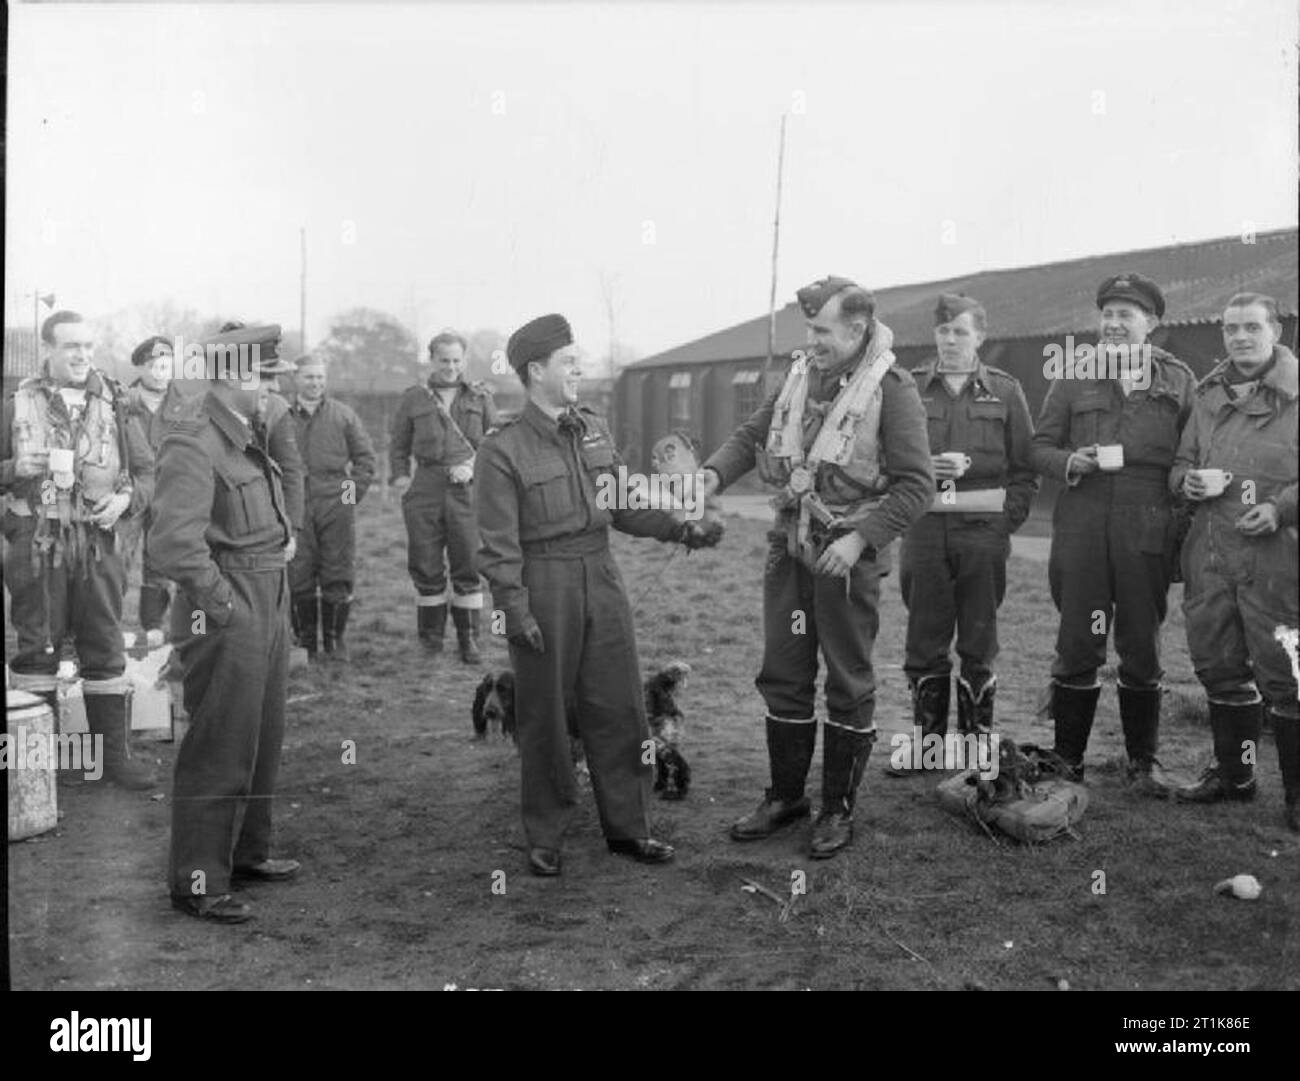 Royal Air Force Bomber Command, 1942-1945. Sergeant H C Clayton, the bomb-aimer of a Handley Page Halifax 'N for Nuts', of No. 77 Squadron RAF, shows the crew's mascot 'Wakee Wakee' to Air Commodore G A Walker, Air Officer Commanding No. 42 Base, at Elvington, Yorkshire. On the left is the Station Commander of Elvington, Group Captain S S Bertram, and to Clayton's immediate right two pilots of 77 Squadron, Flight Lieutenant P M Cadman and Flight Lieutenant S E Wodehouse, both of whom were to lose their lives on bombing raids in June 1944. Stock Photo